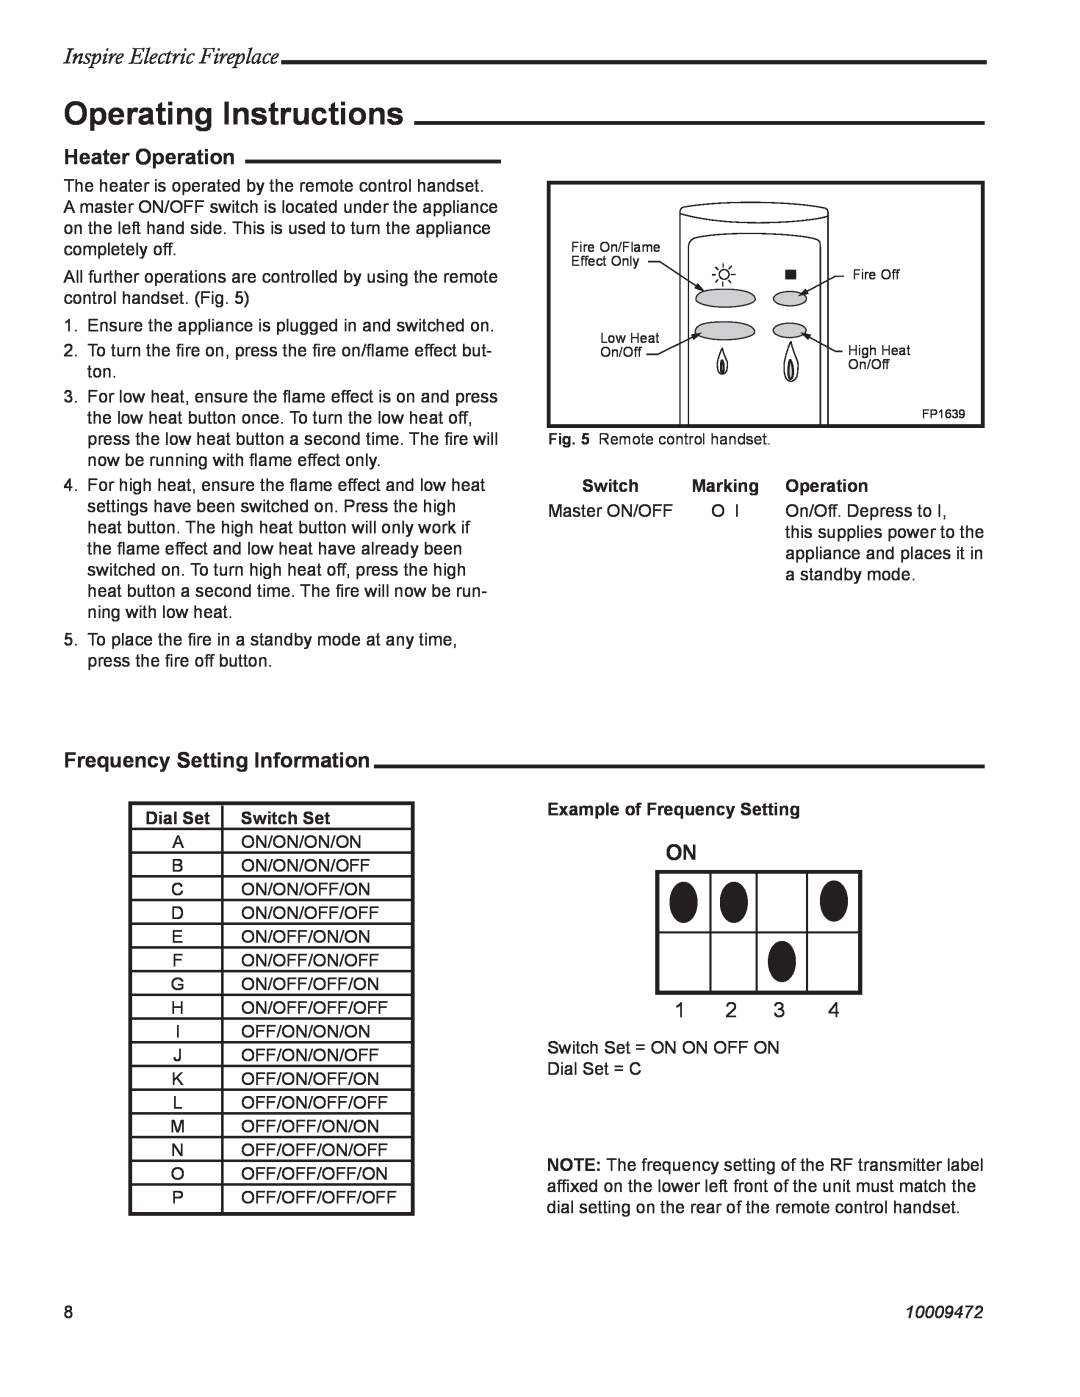 Vermont Casting ICVCTK02, ICVCTK01 manual Operating Instructions, Inspire Electric Fireplace, Heater Operation, 10009472 